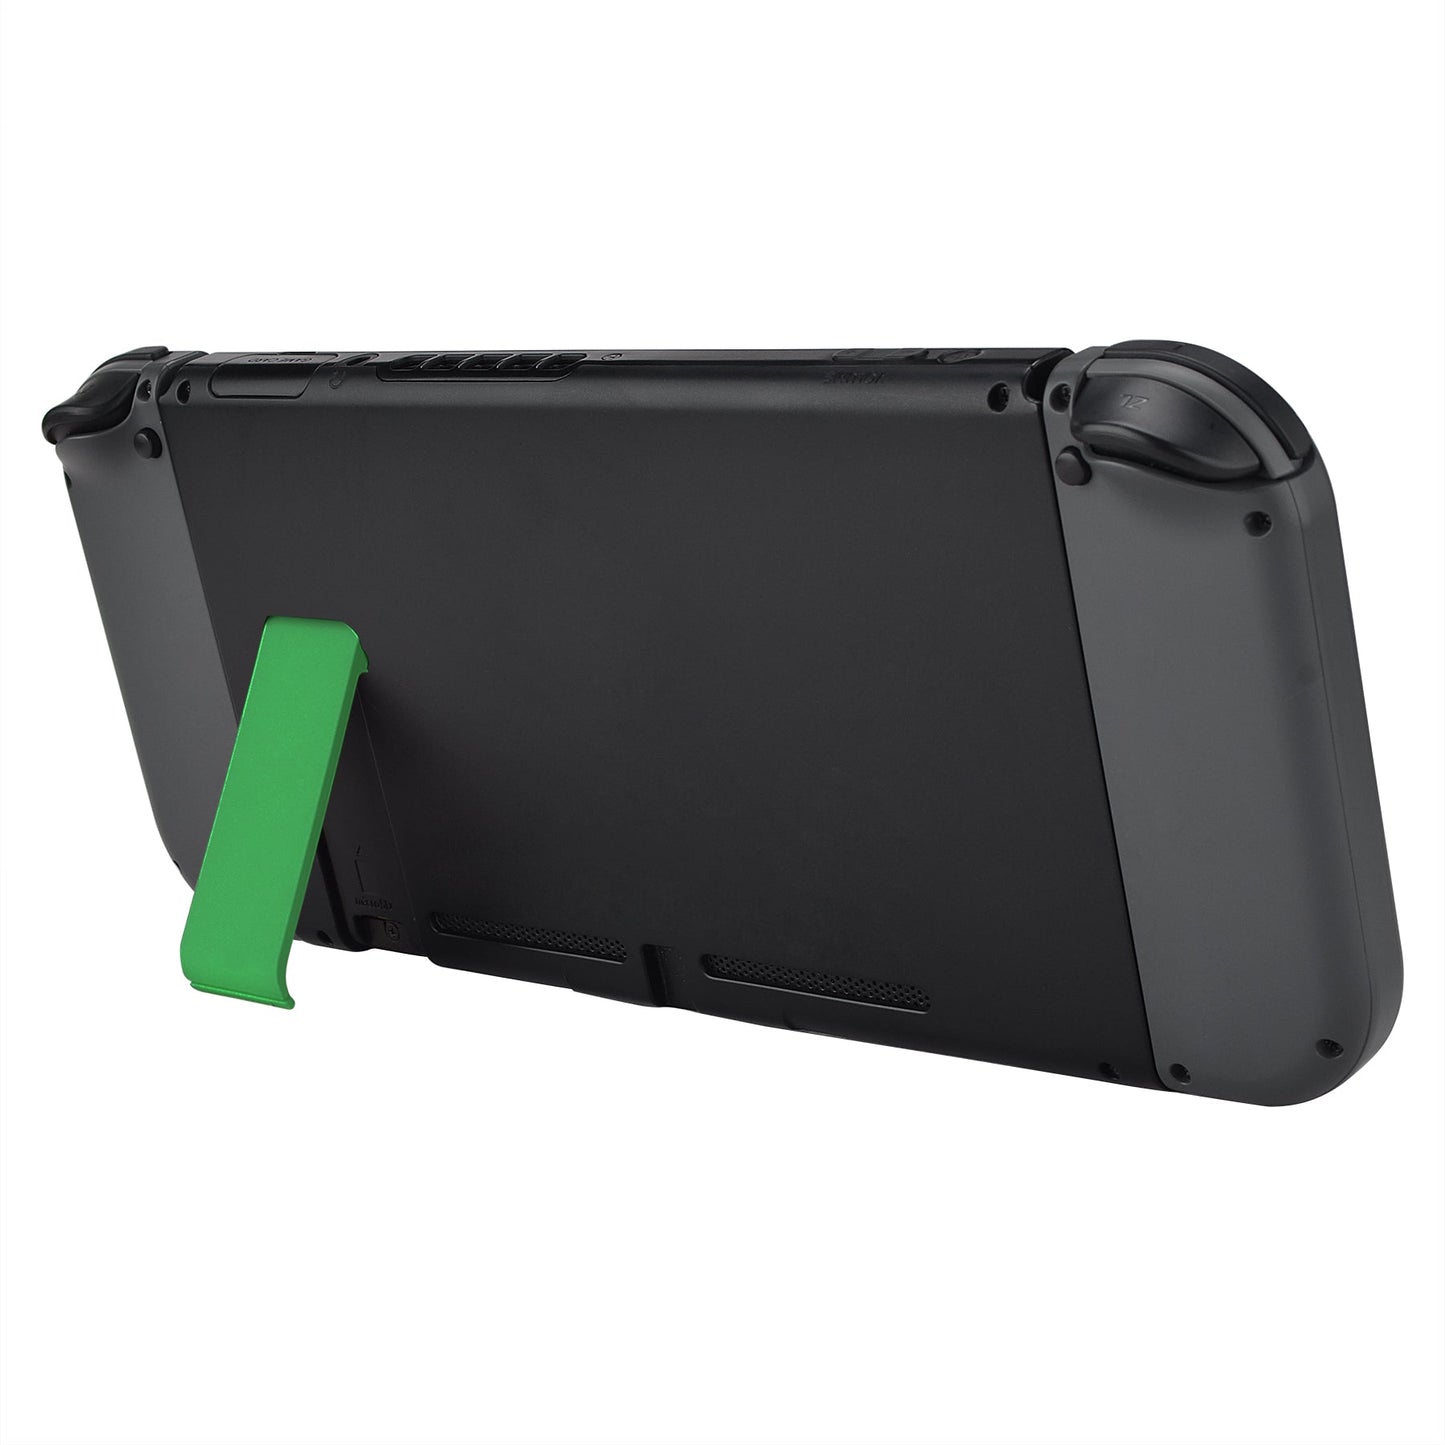 eXtremeRate Retail 2 Set of Green Soft Touch Replacement Kickstand for Nintendo Switch Console, Back Bracket Holder Kick Stand for Nintendo Switch - Console NOT Included - AJ418